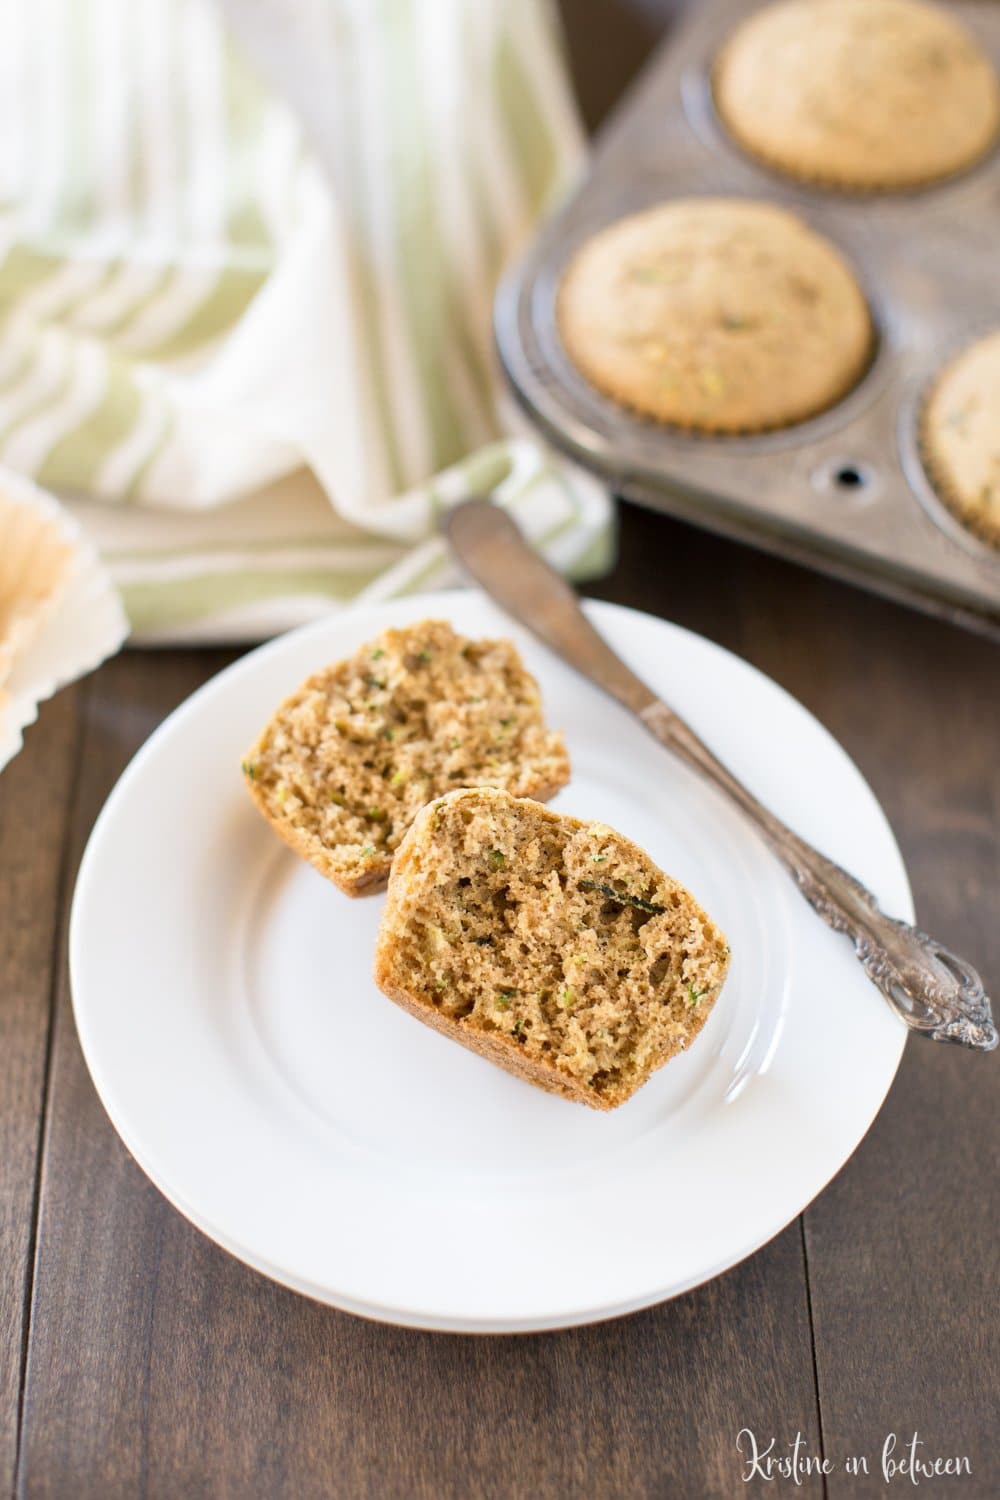 Homemade whole wheat zucchini muffins! Soft and fully of flavor, the perfect way to use up all of those summer zucchinis!